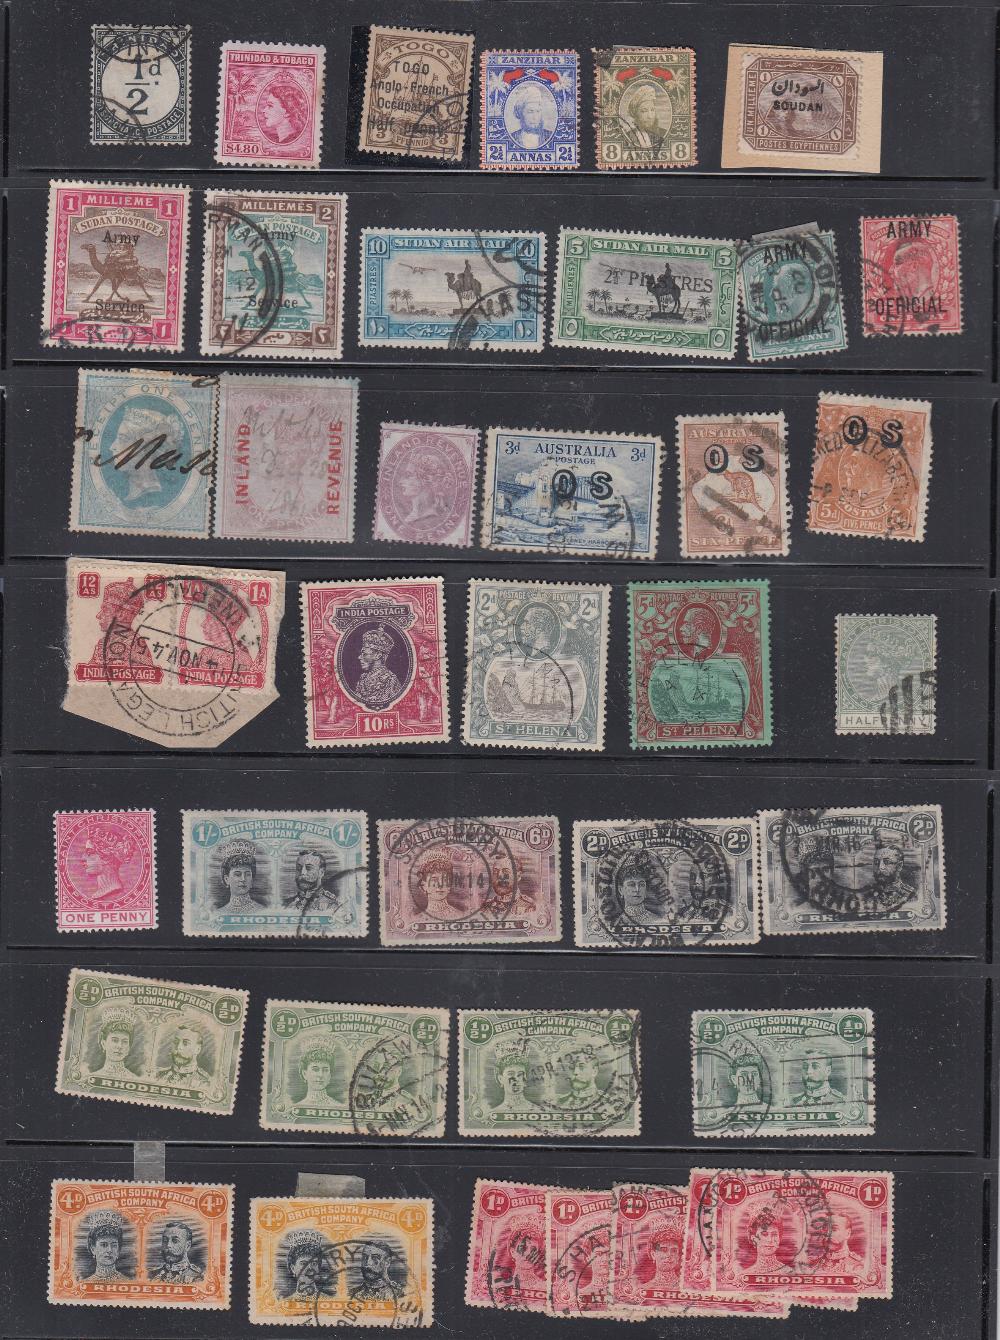 STAMPS BRITISH COMMONWEALTH Various singles and sets on hagner pages etc. - Image 3 of 4